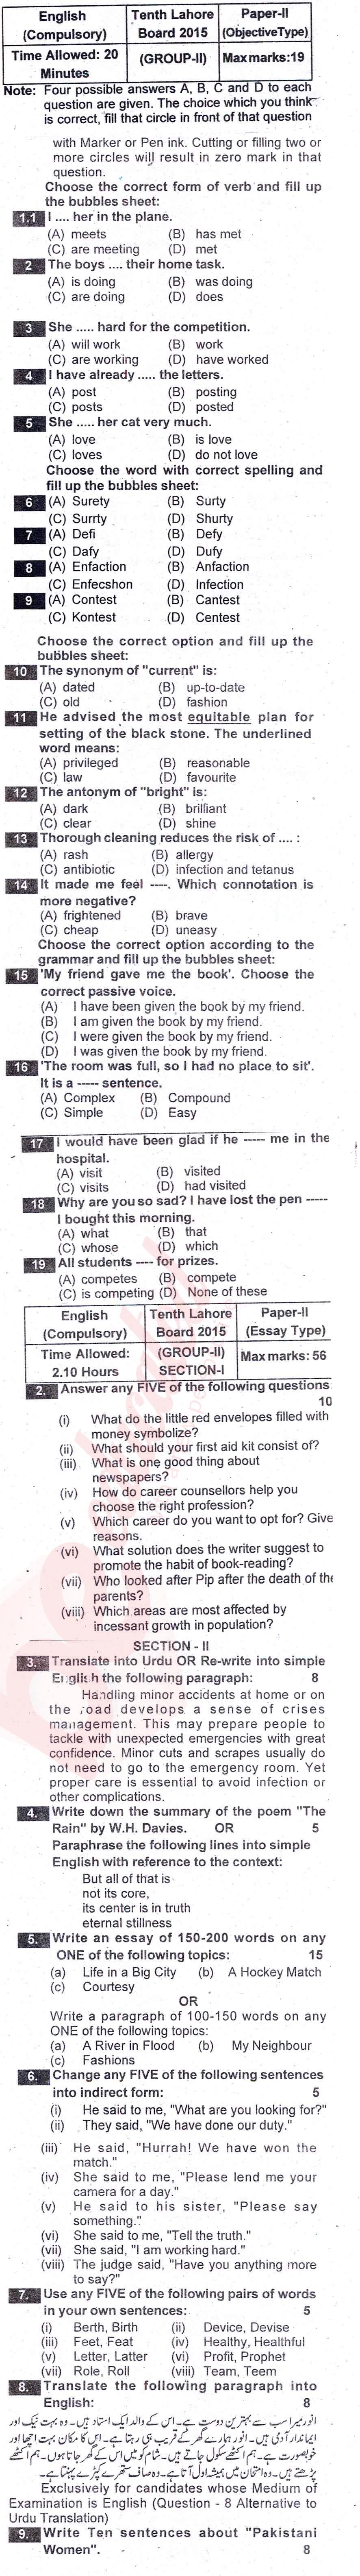 English 10th class Past Paper Group 2 BISE Lahore 2015